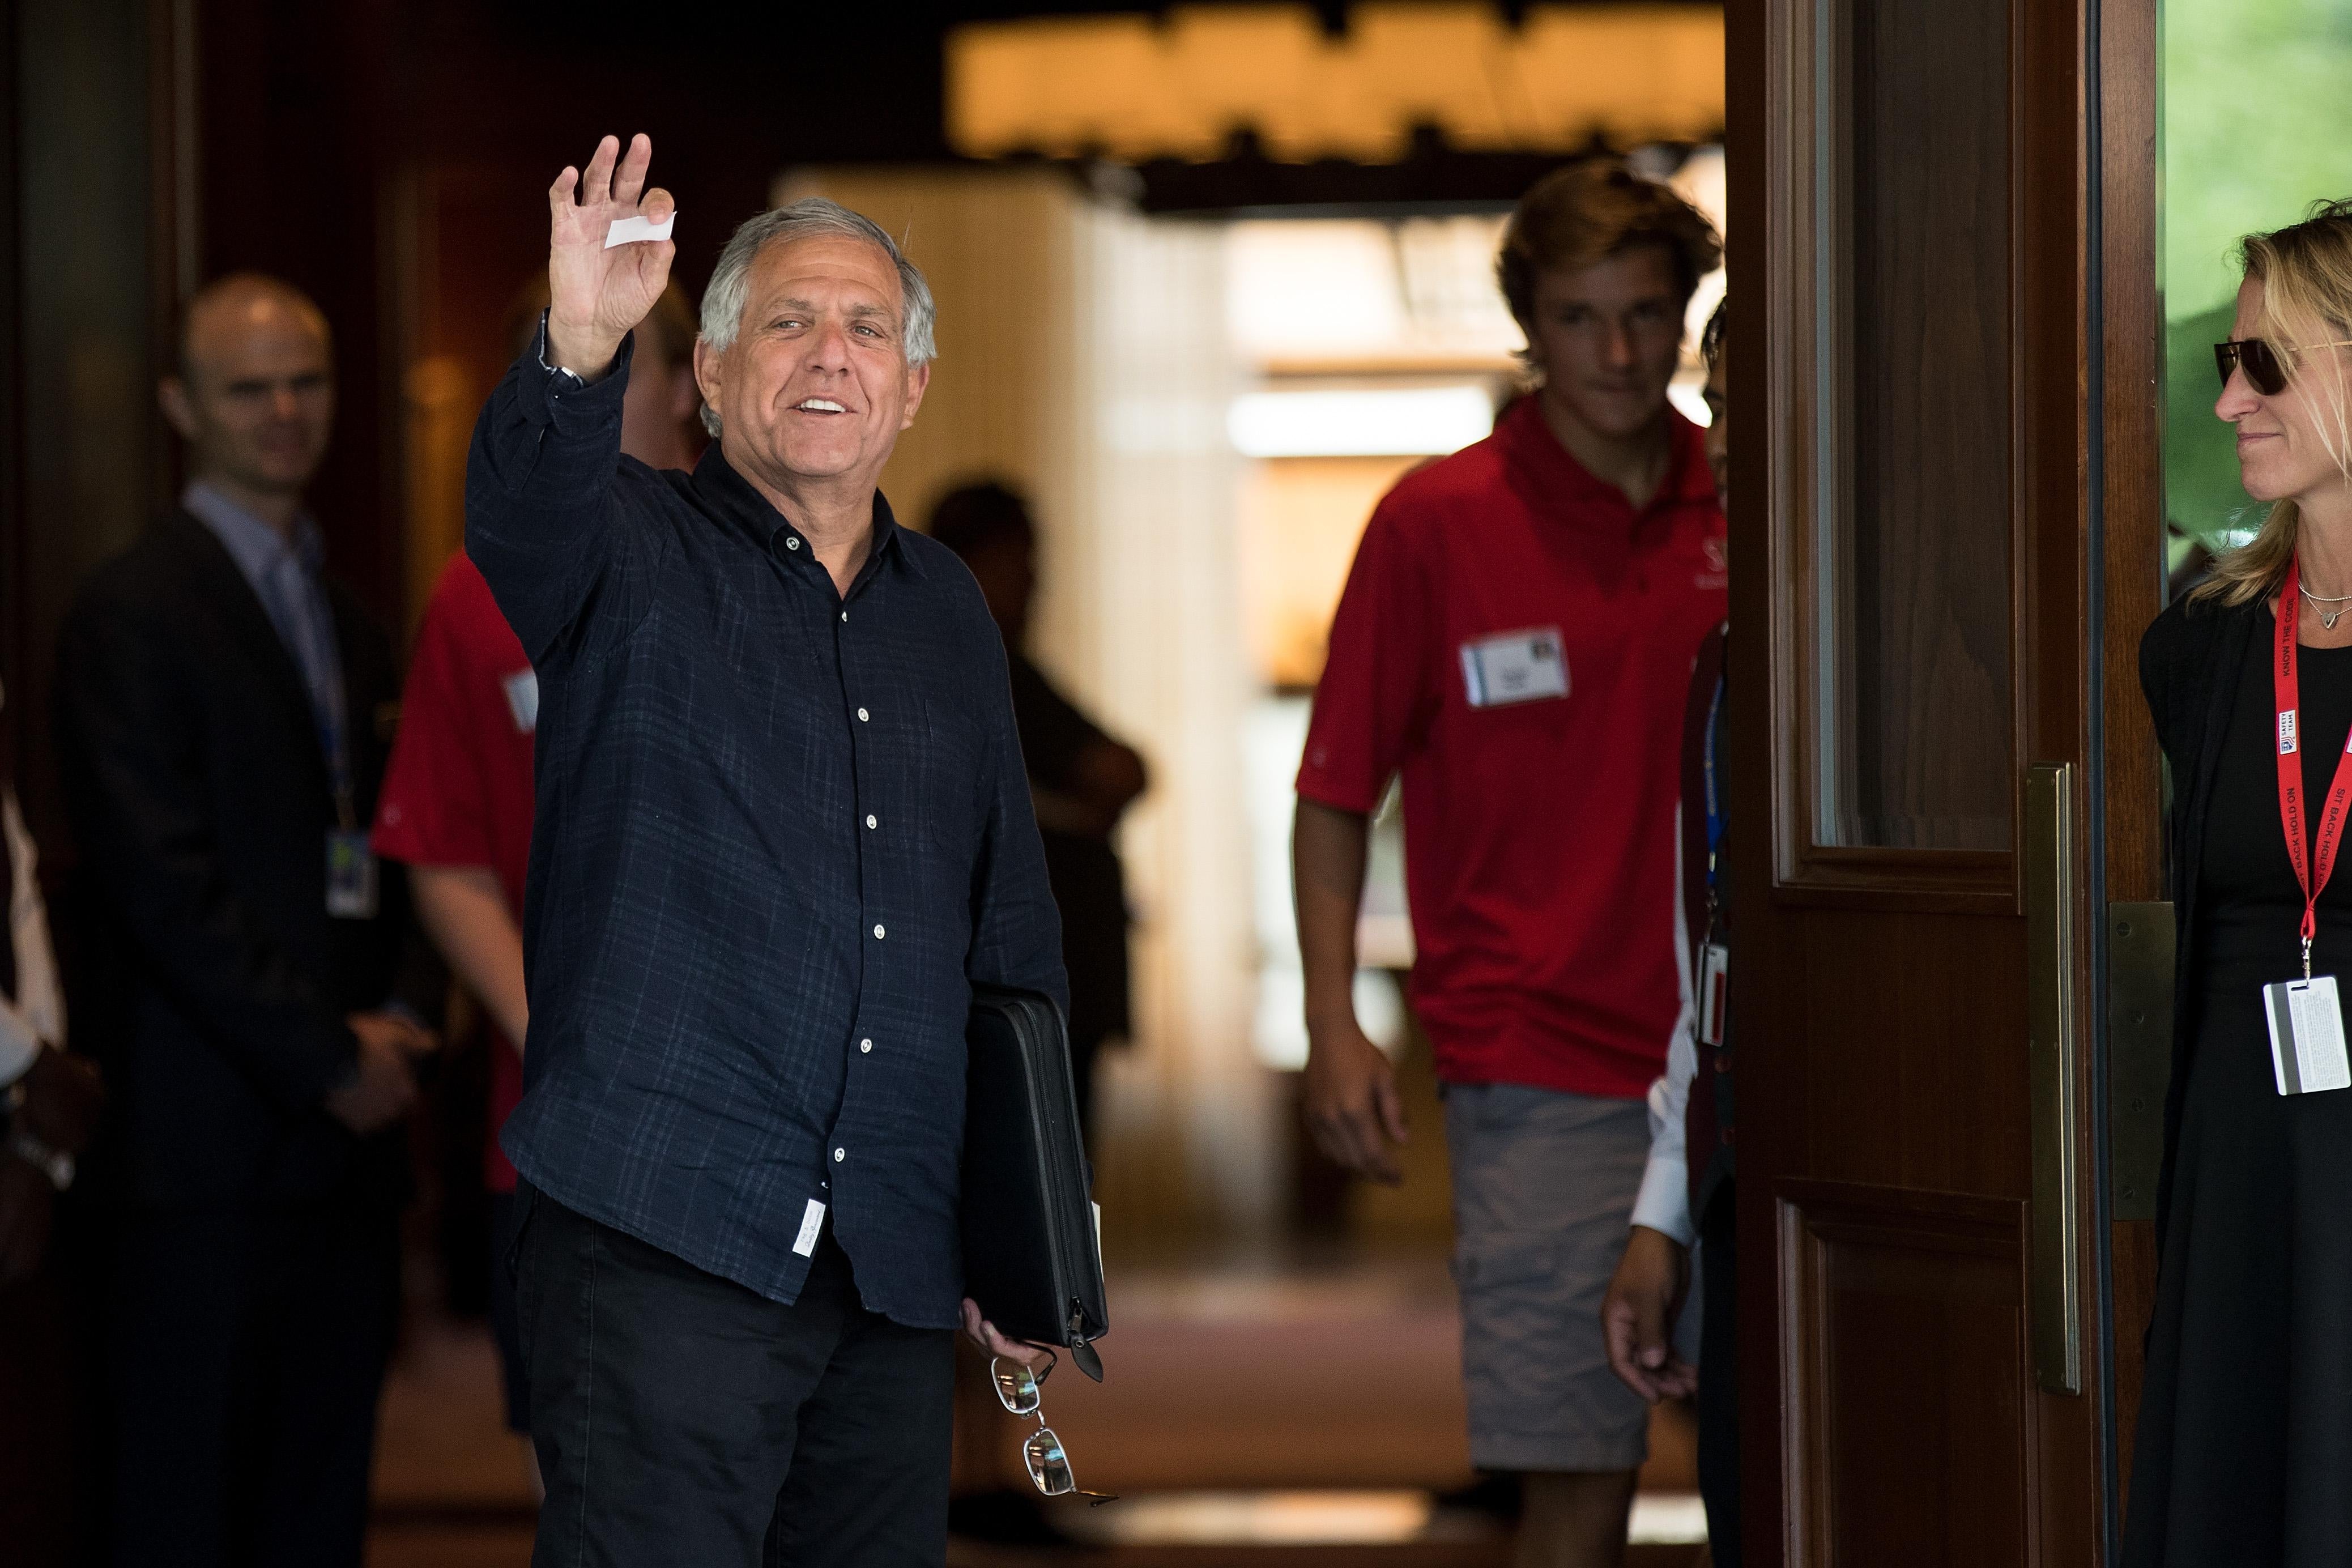 Les Moonves waves as he arrives at a conference.